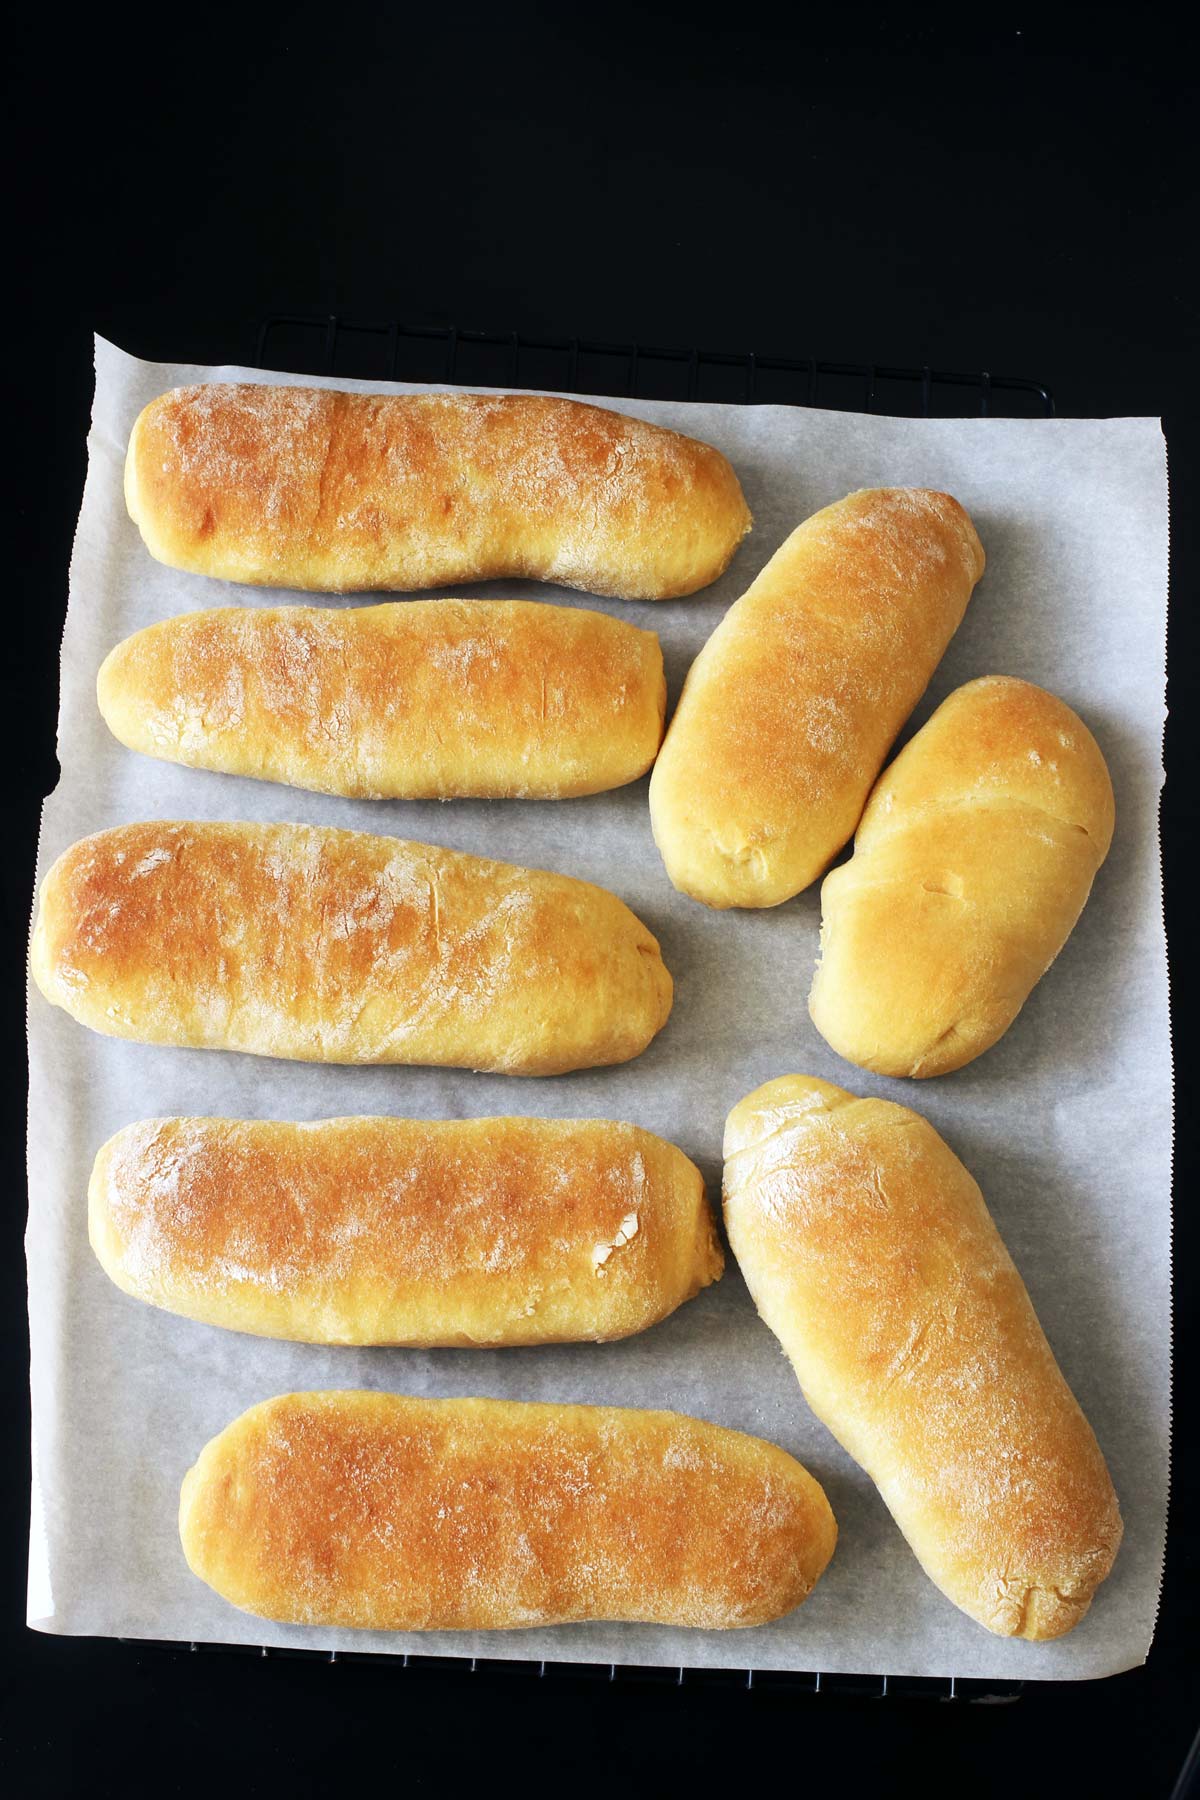 baked rolls on parchment lined tray